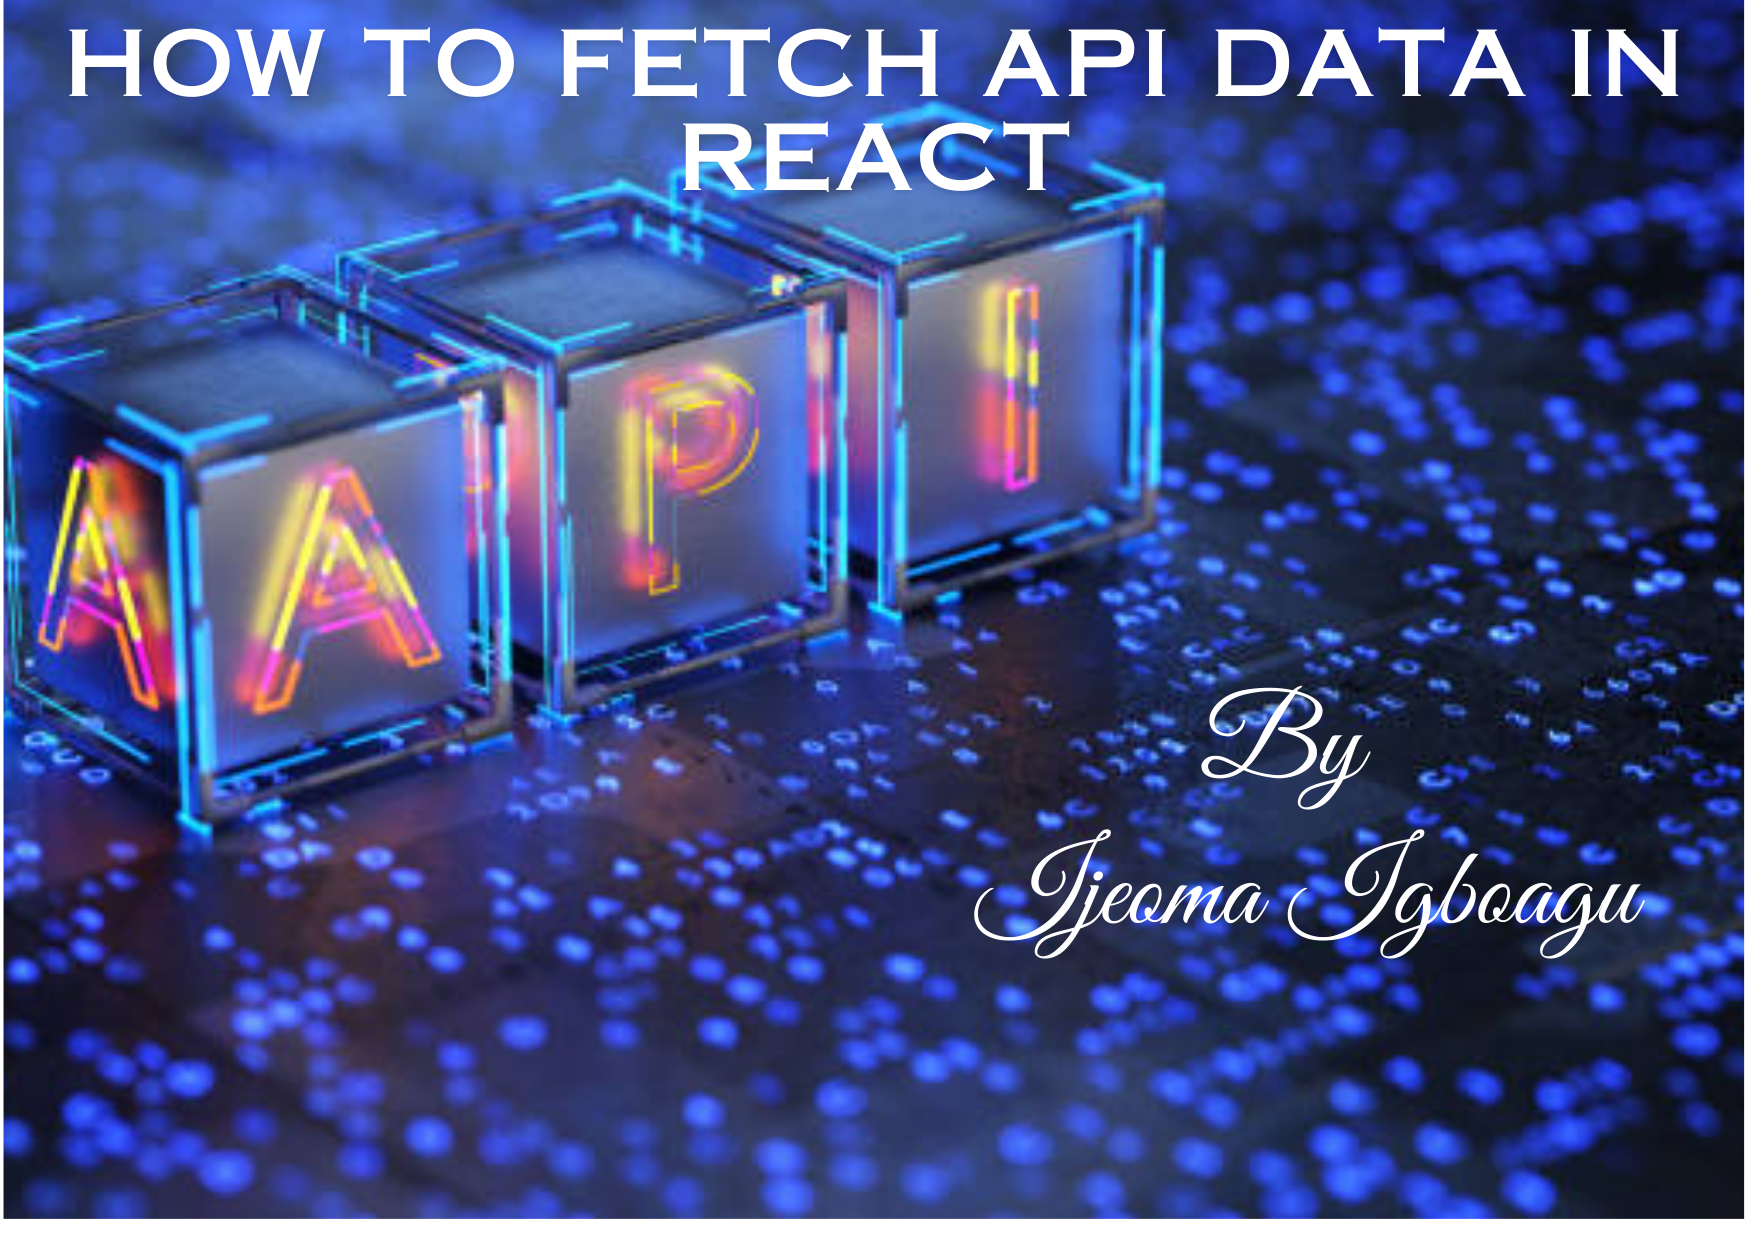 How to Fetch API Data in React